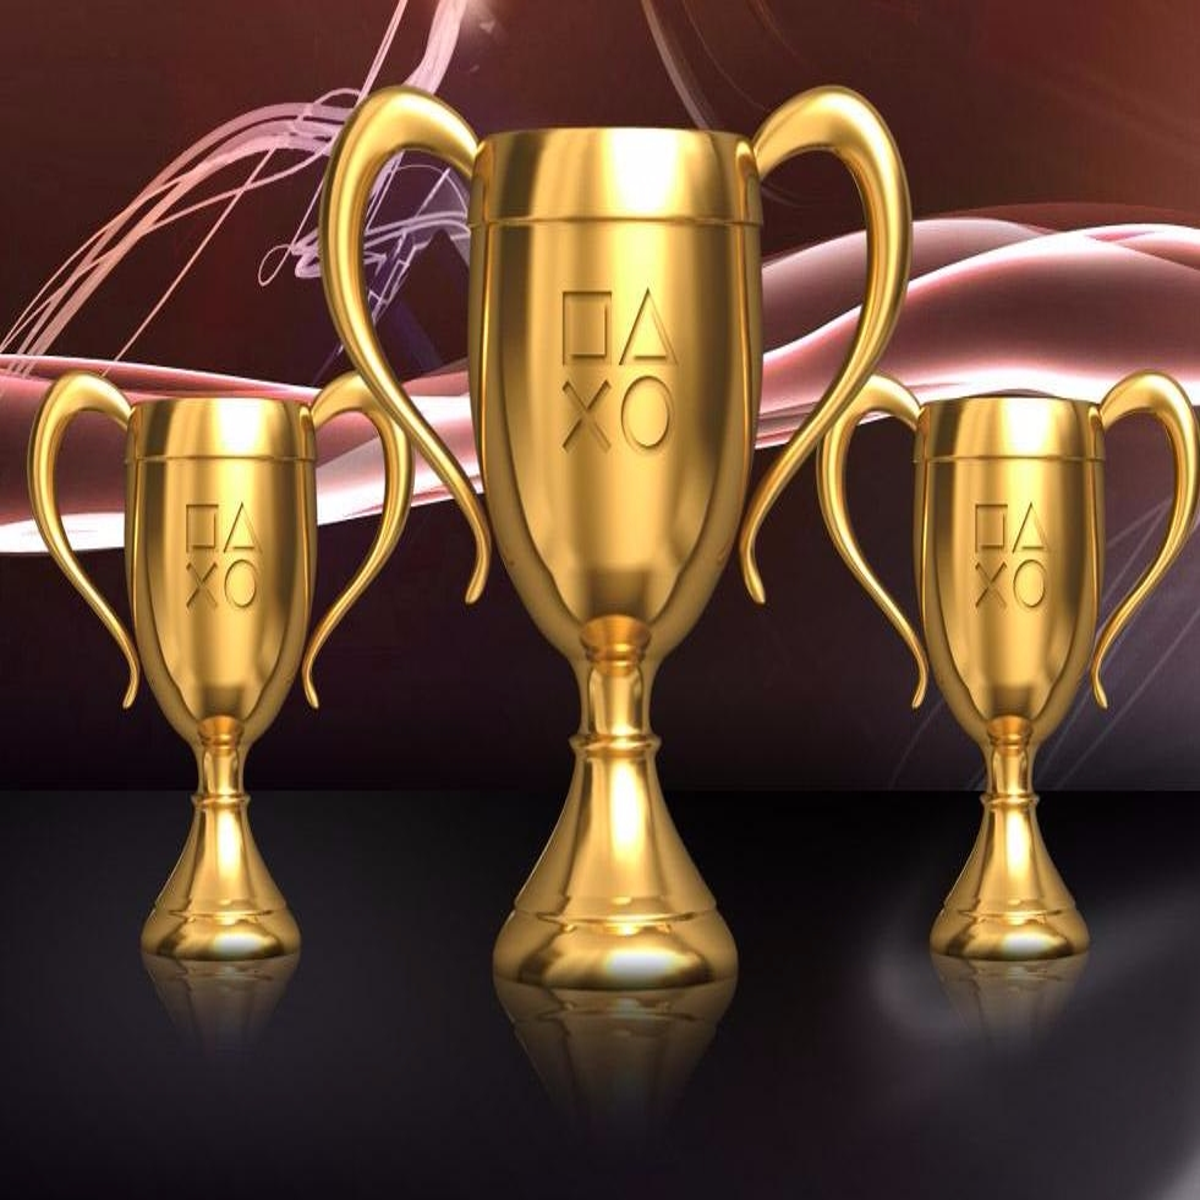 The Table Game: Deluxe Pack Trophies •